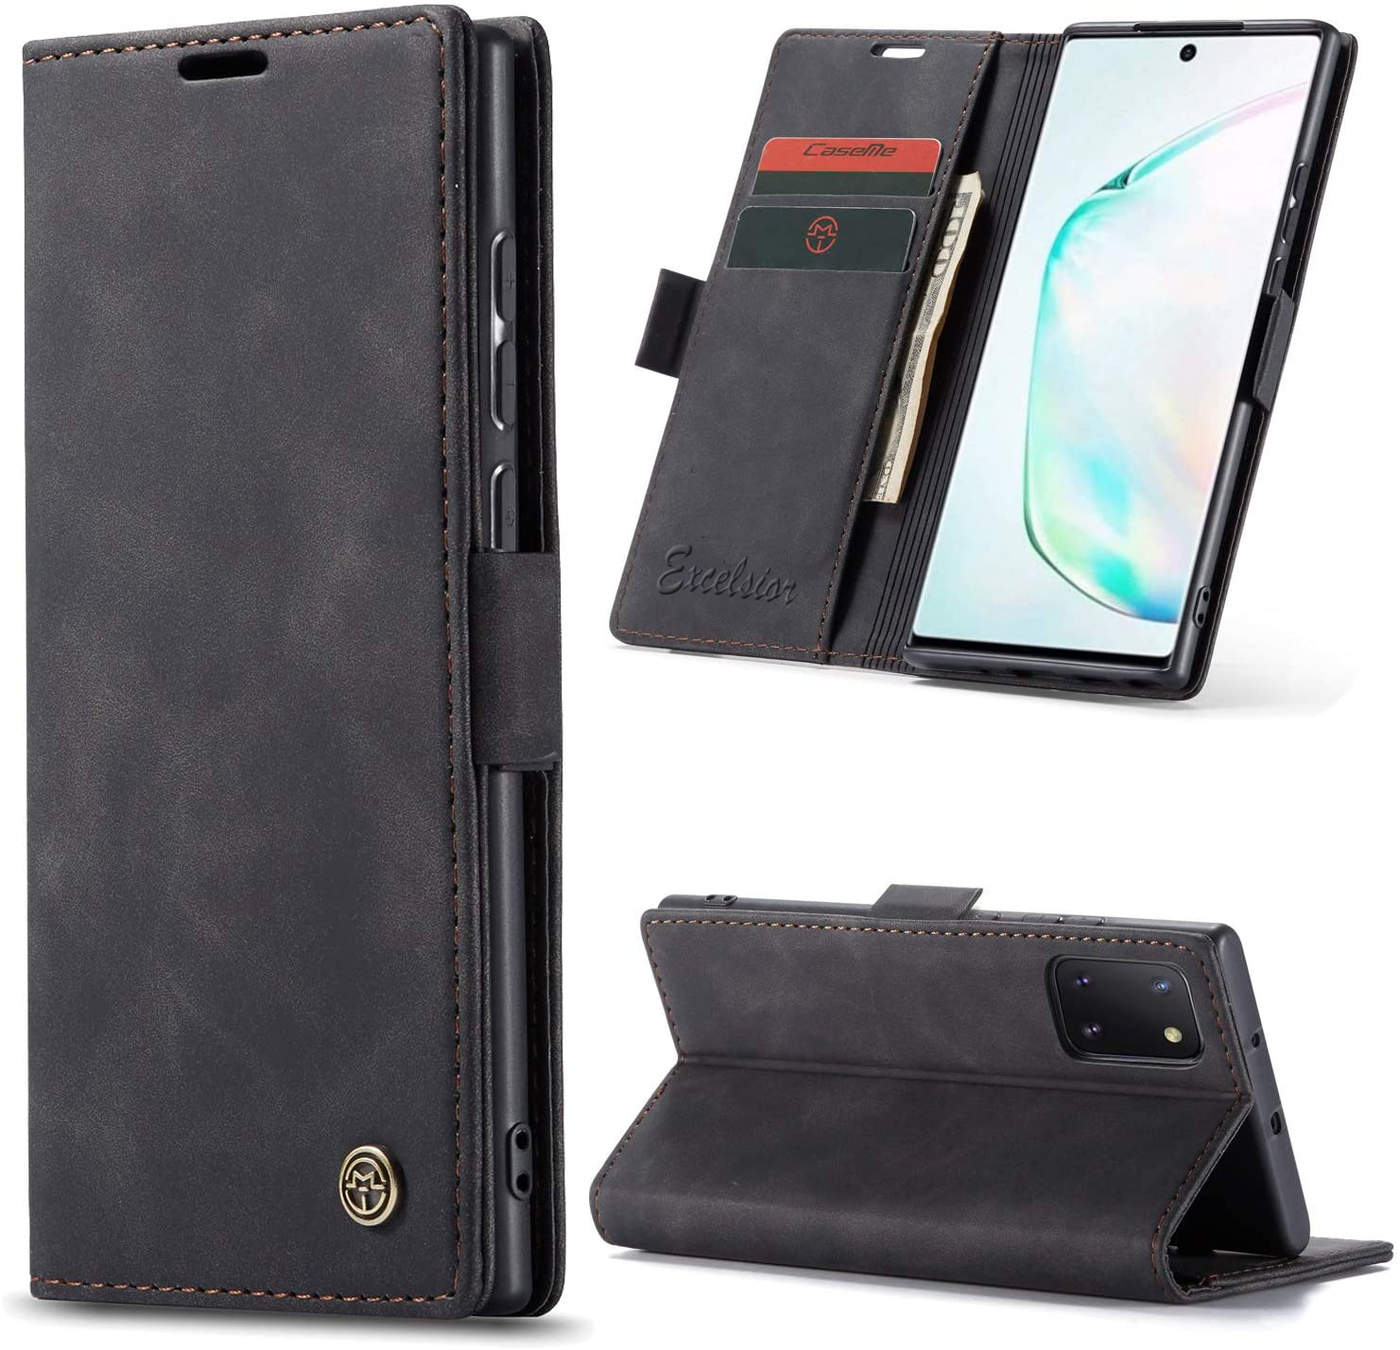 Samsung Galaxy Note 10 Lite wallet flip cover case with soft tpu inner cover 